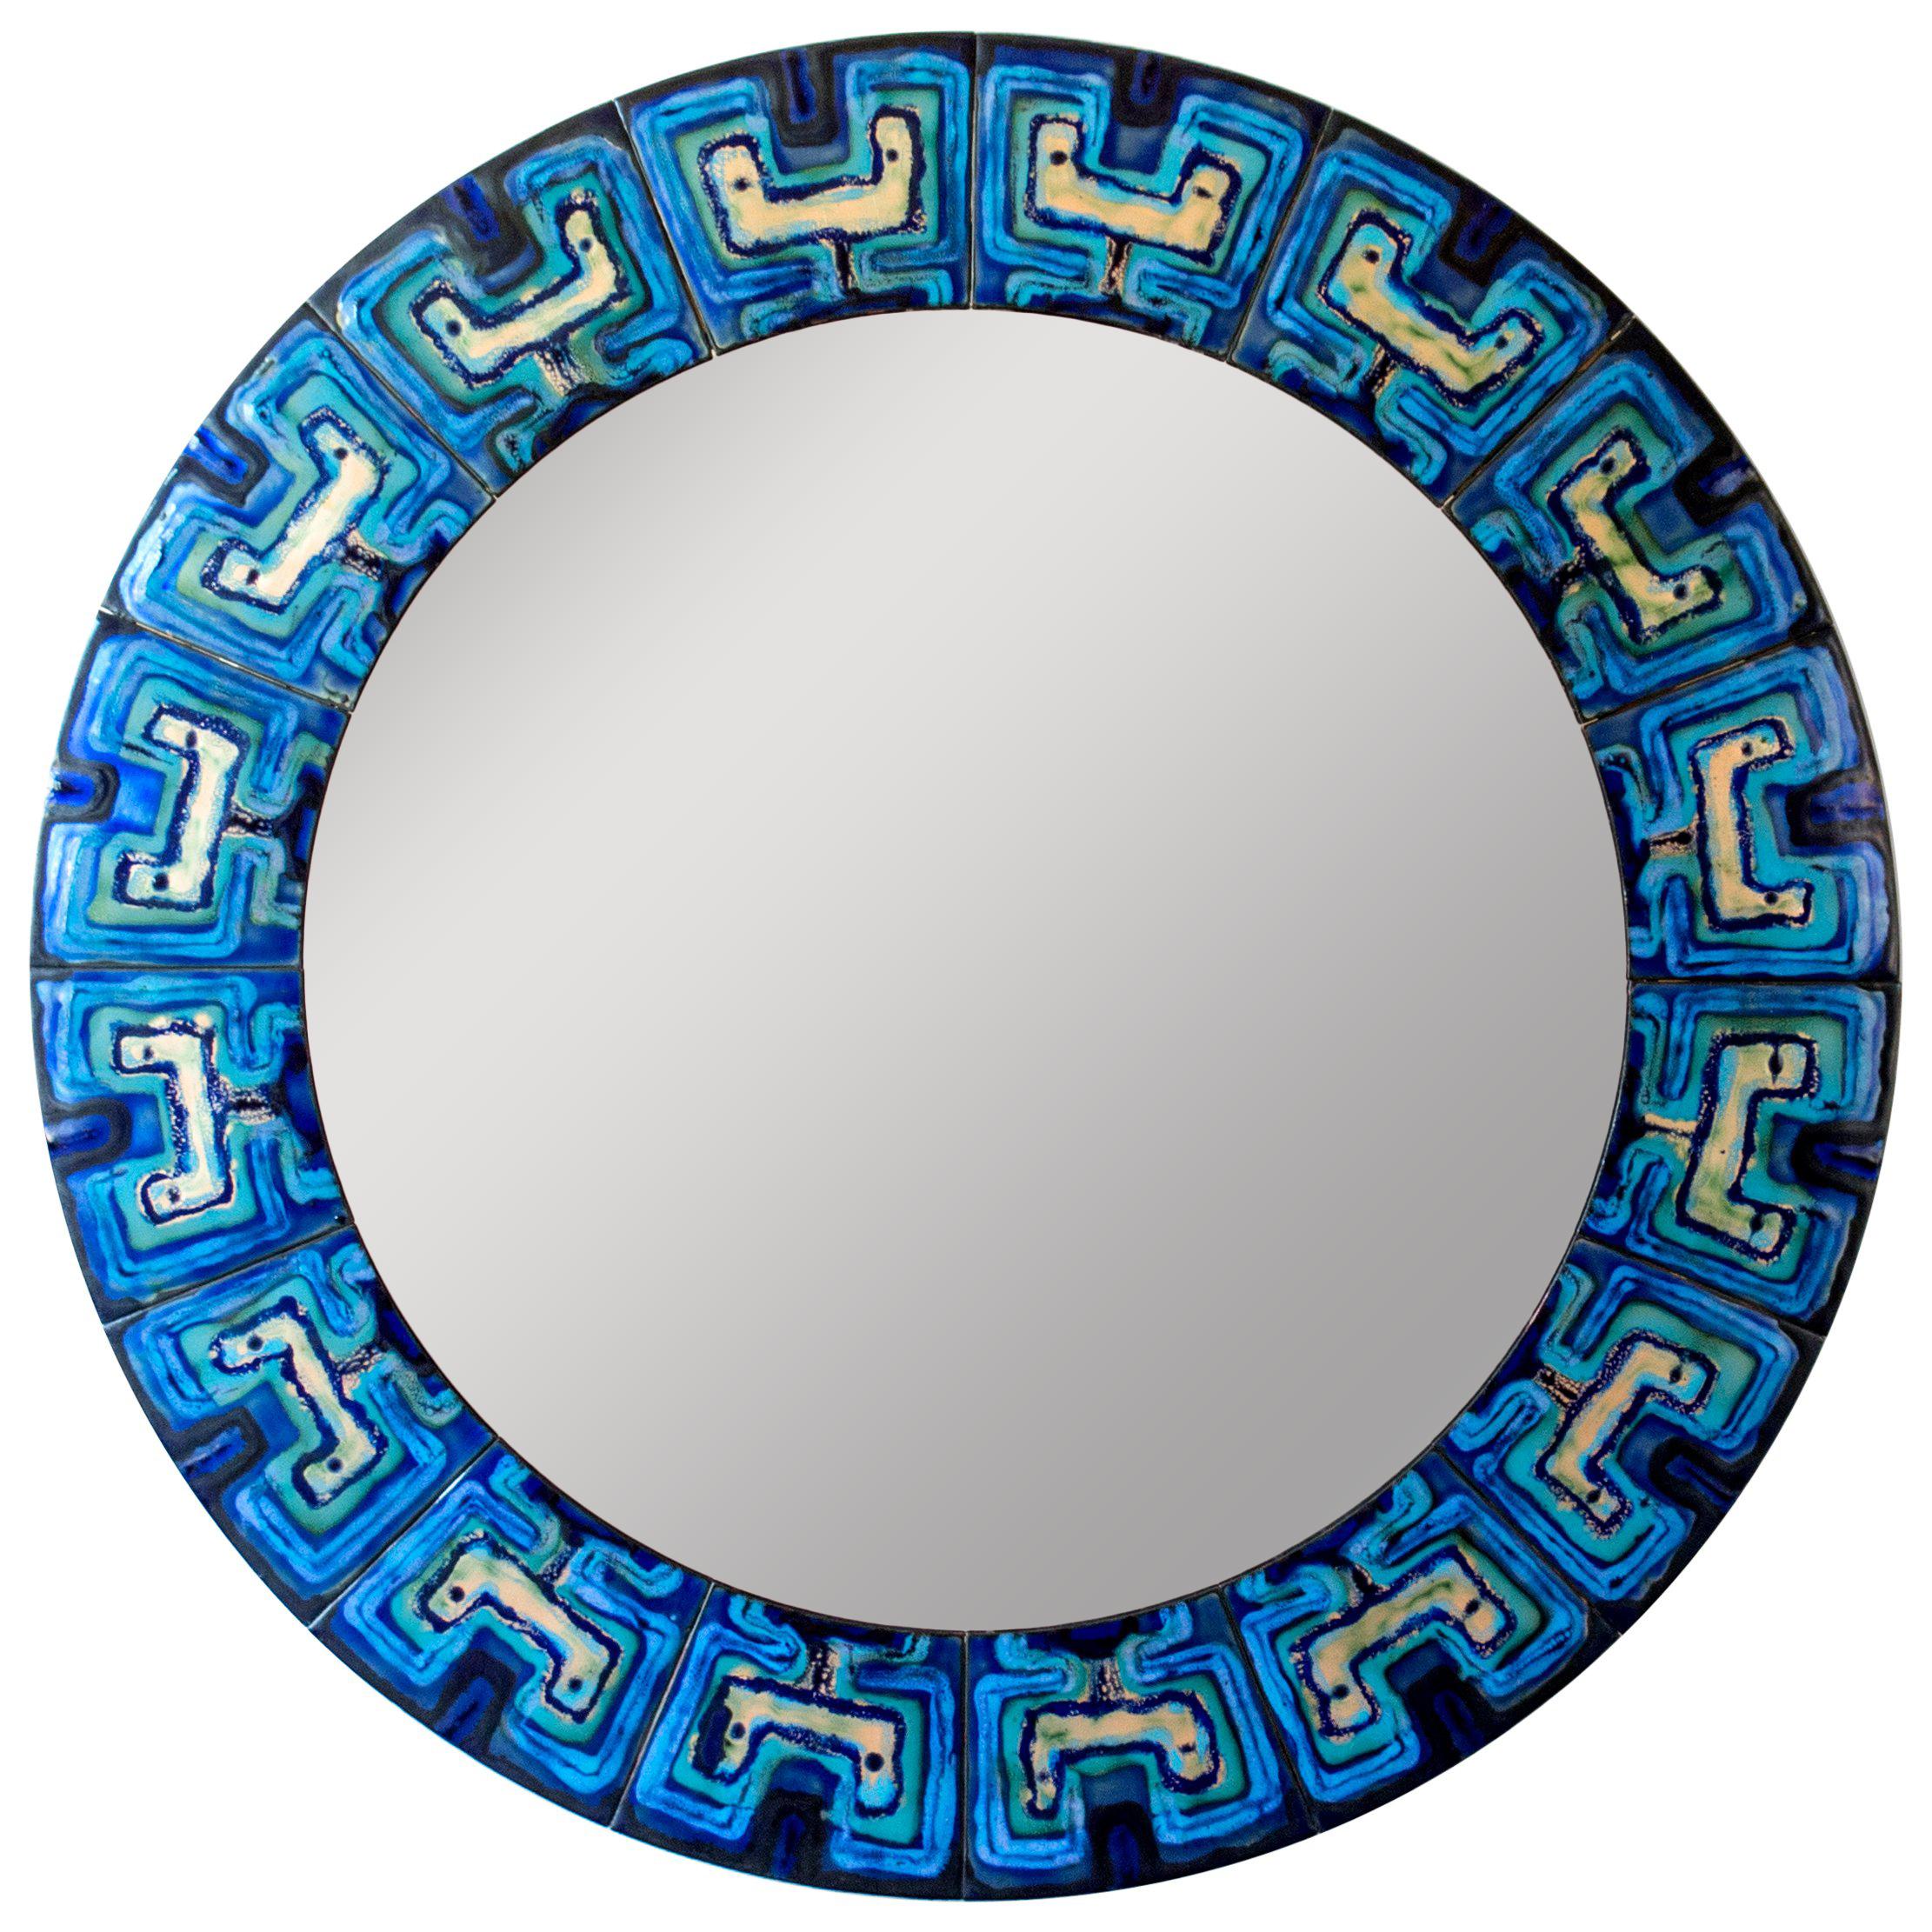 Bodil Eje, Unique Turquoise and Persian Blue Mid-Century Circular Enamel Mirror For Sale